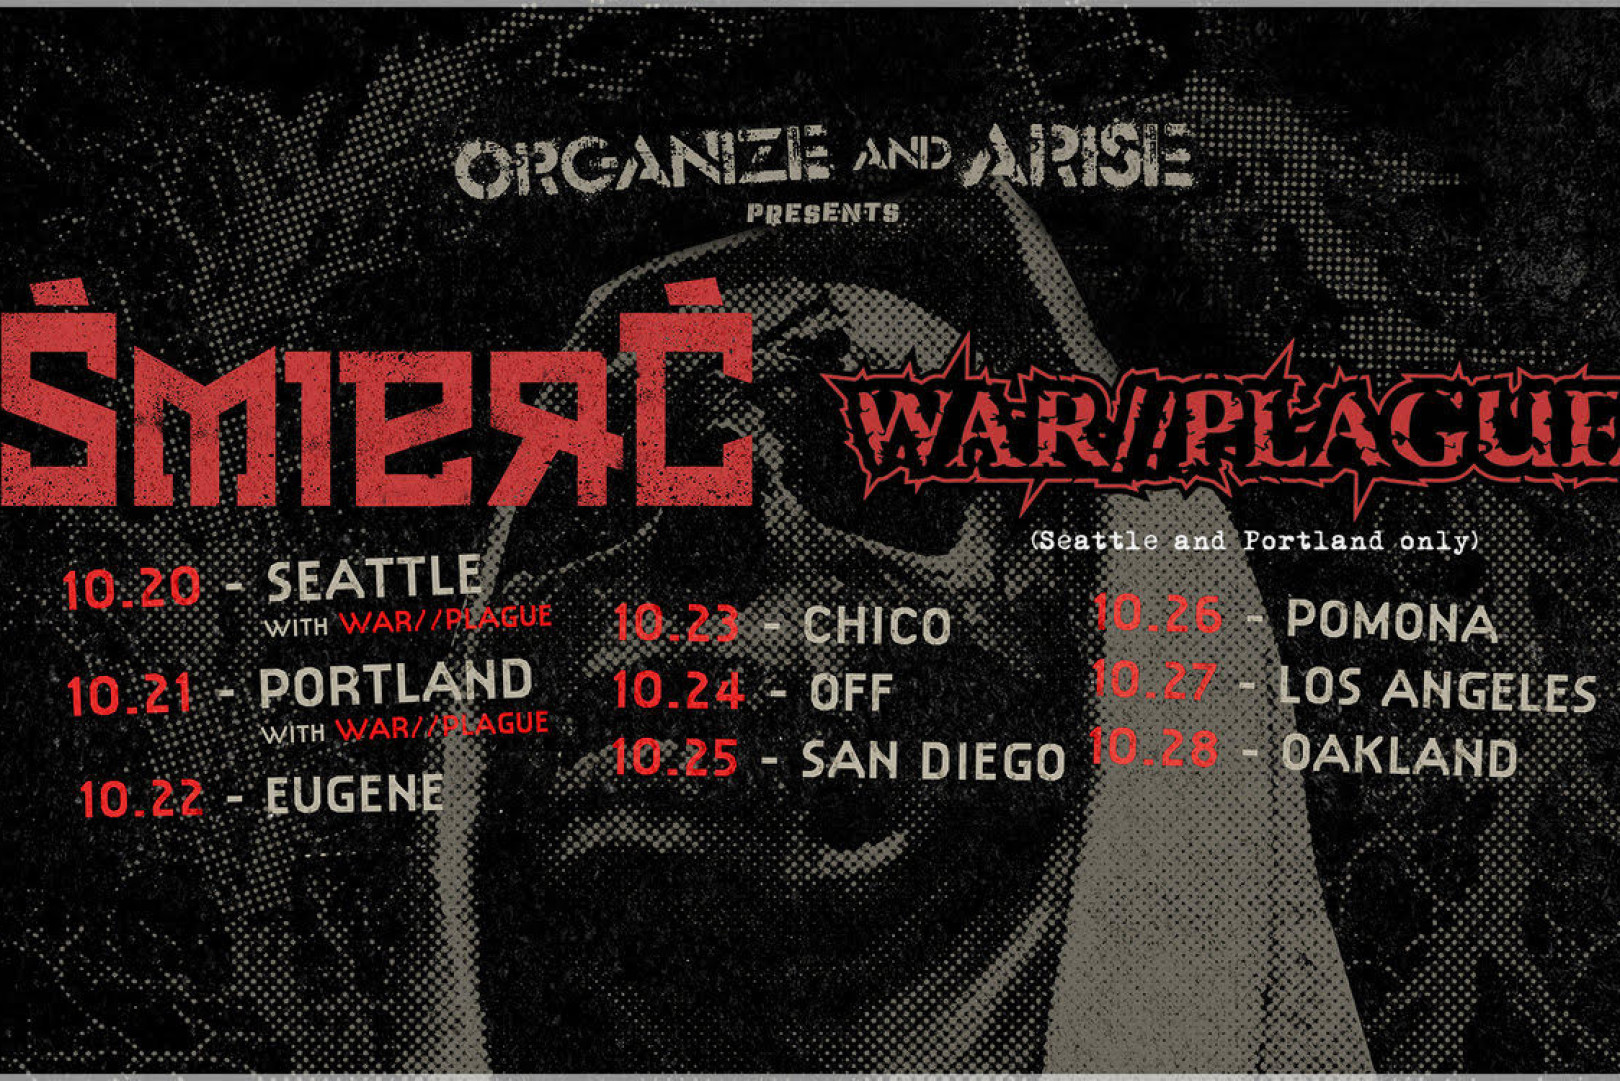 Smierc to play six shows, two with War//Plague